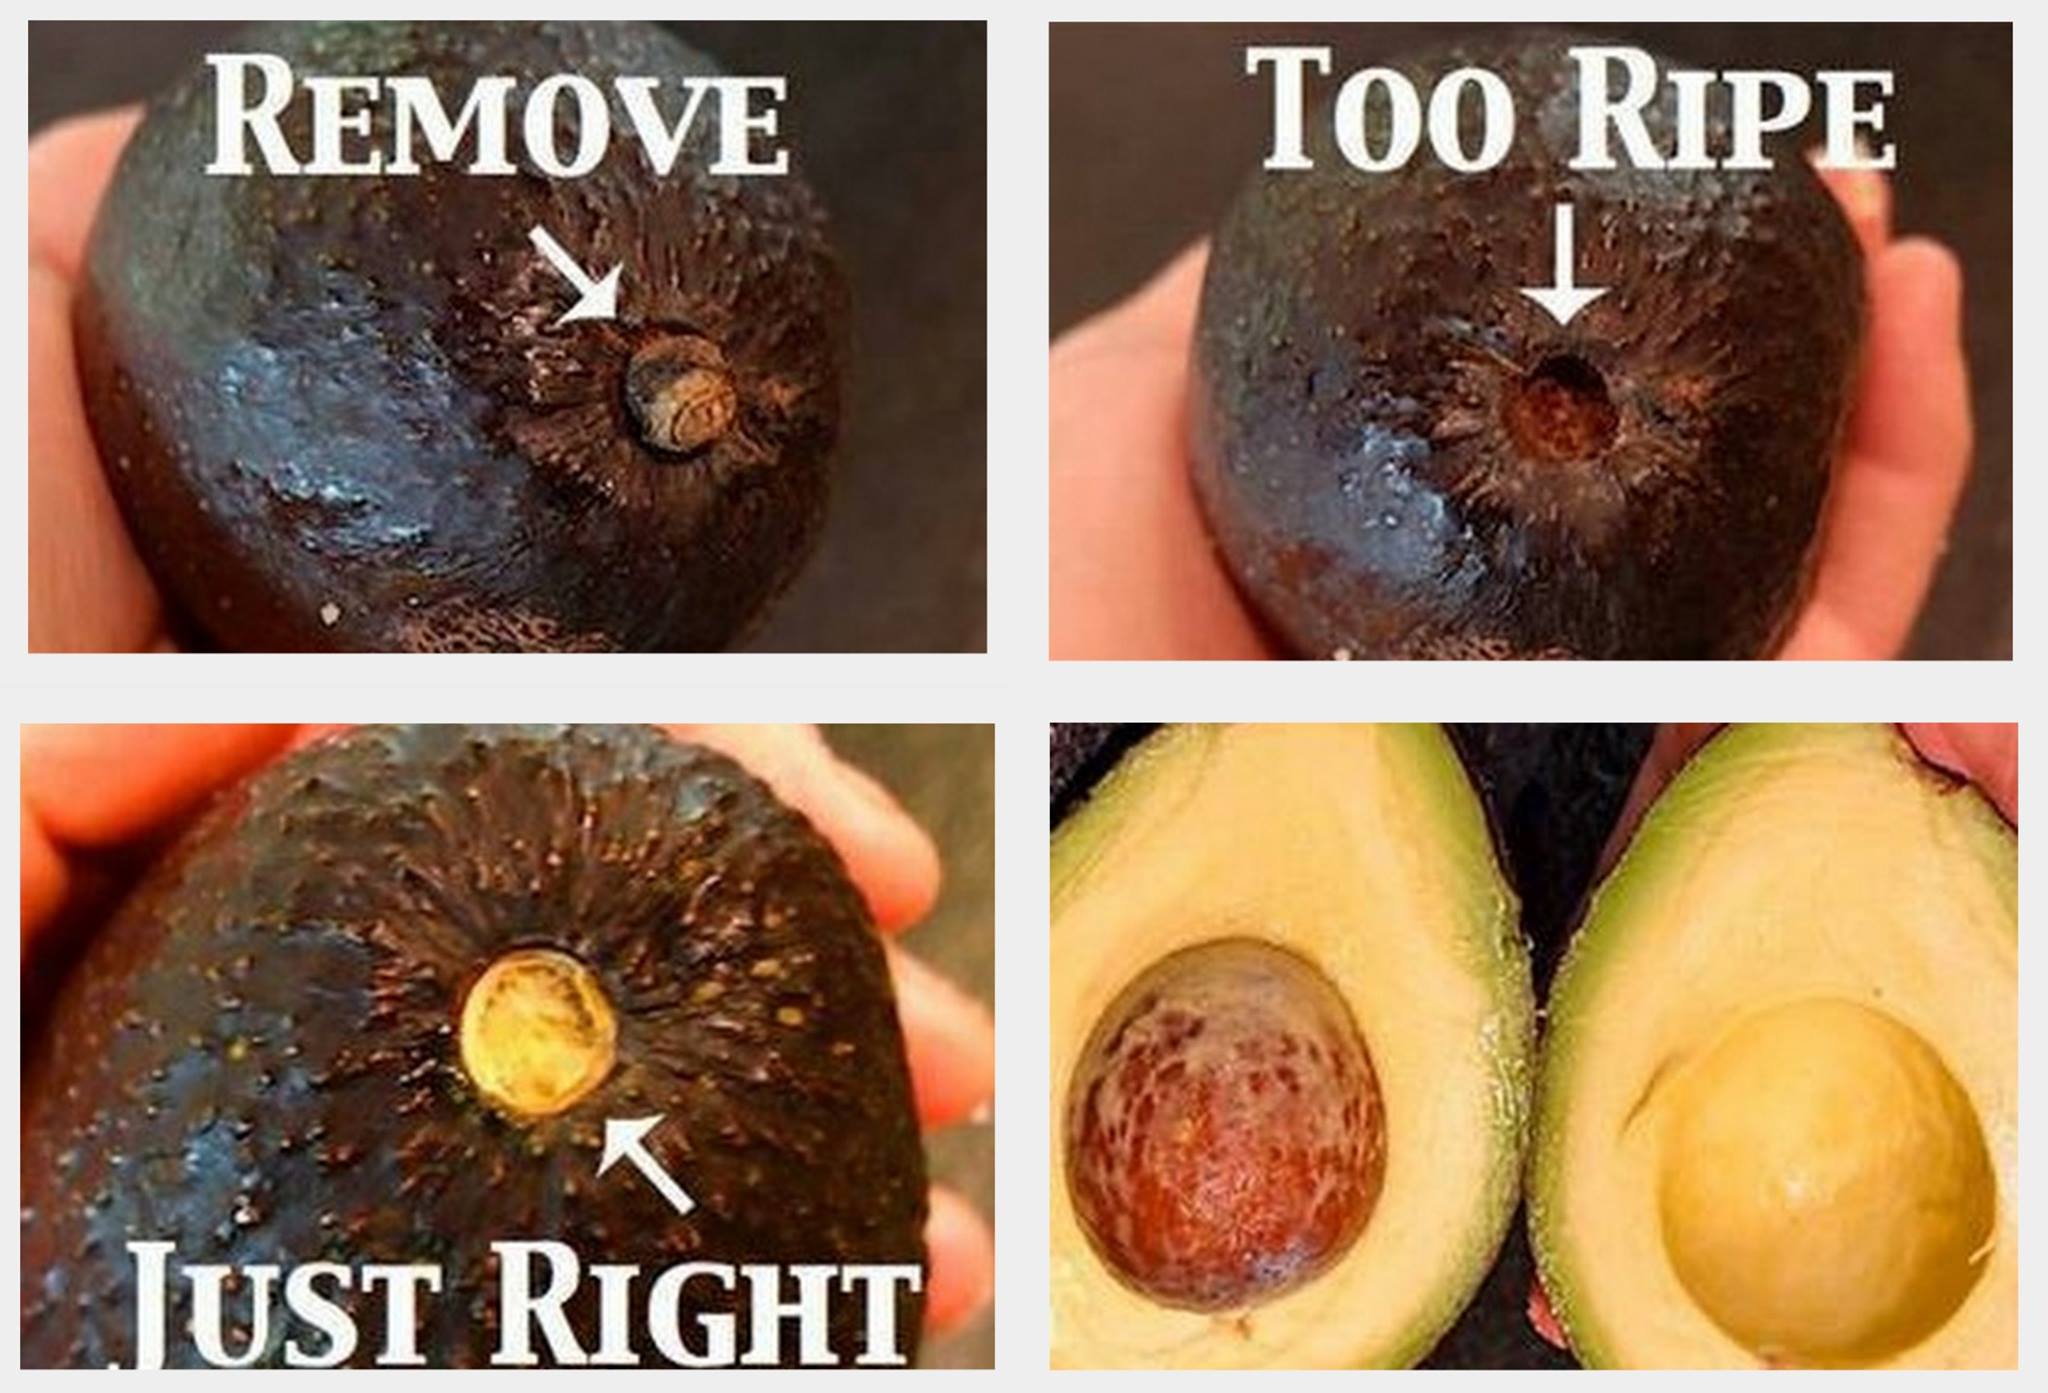 How to tell if an Avocado is ripe